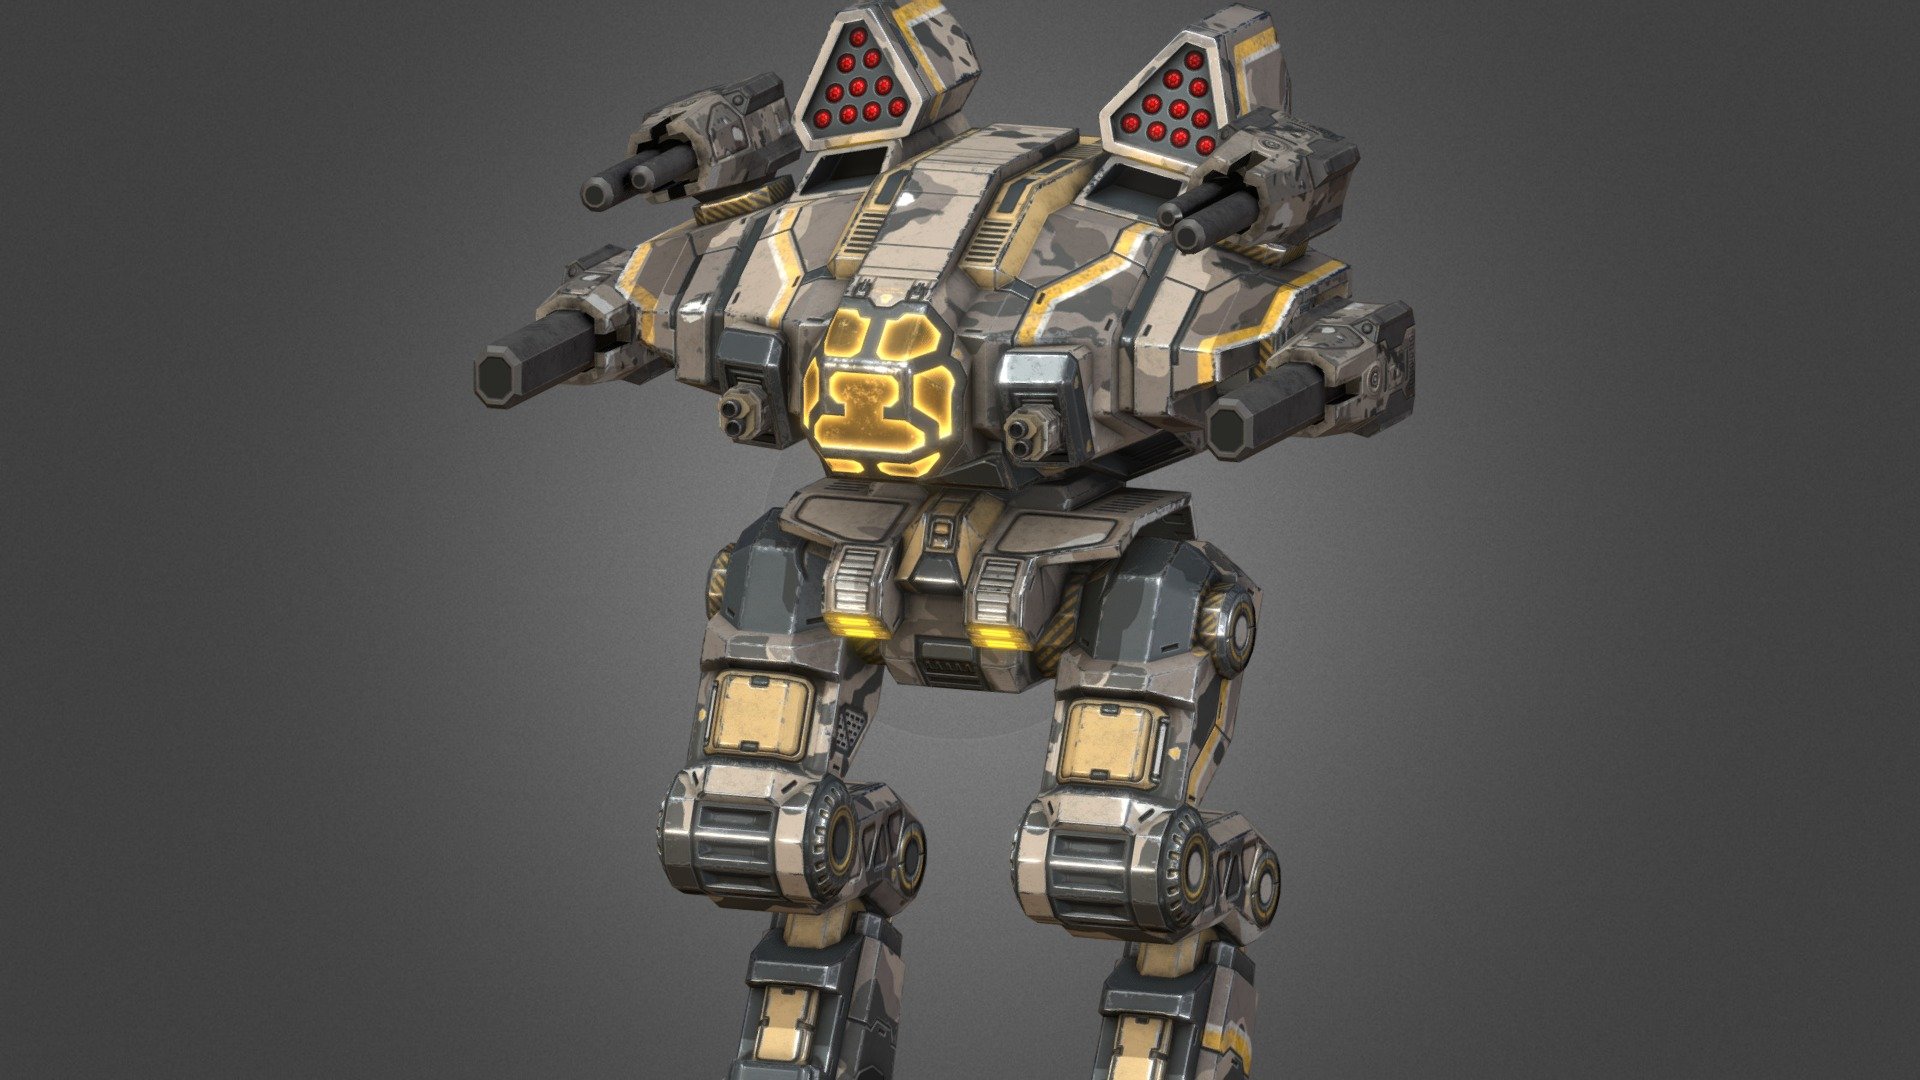 Goliath is one of battle mech project which contains various mechs and individual weapon sets. It is designed as Low-Poly for mobile games.

Weapons:

2×1 Missile pods(integrated) 

2 Modular Lasers 

2 Medium Laser 

2 Large Laser

Animations: 

Walk

Idle

Textures: All the textures have 4k resolution and created with PBR workflow 

Albedo 

Normal 

MetalicSmoothness

Emissive

Roughness - Goliath - Lowpoly Animated Mech - Buy Royalty Free 3D model by OP3D (@scifi3d) 3d model